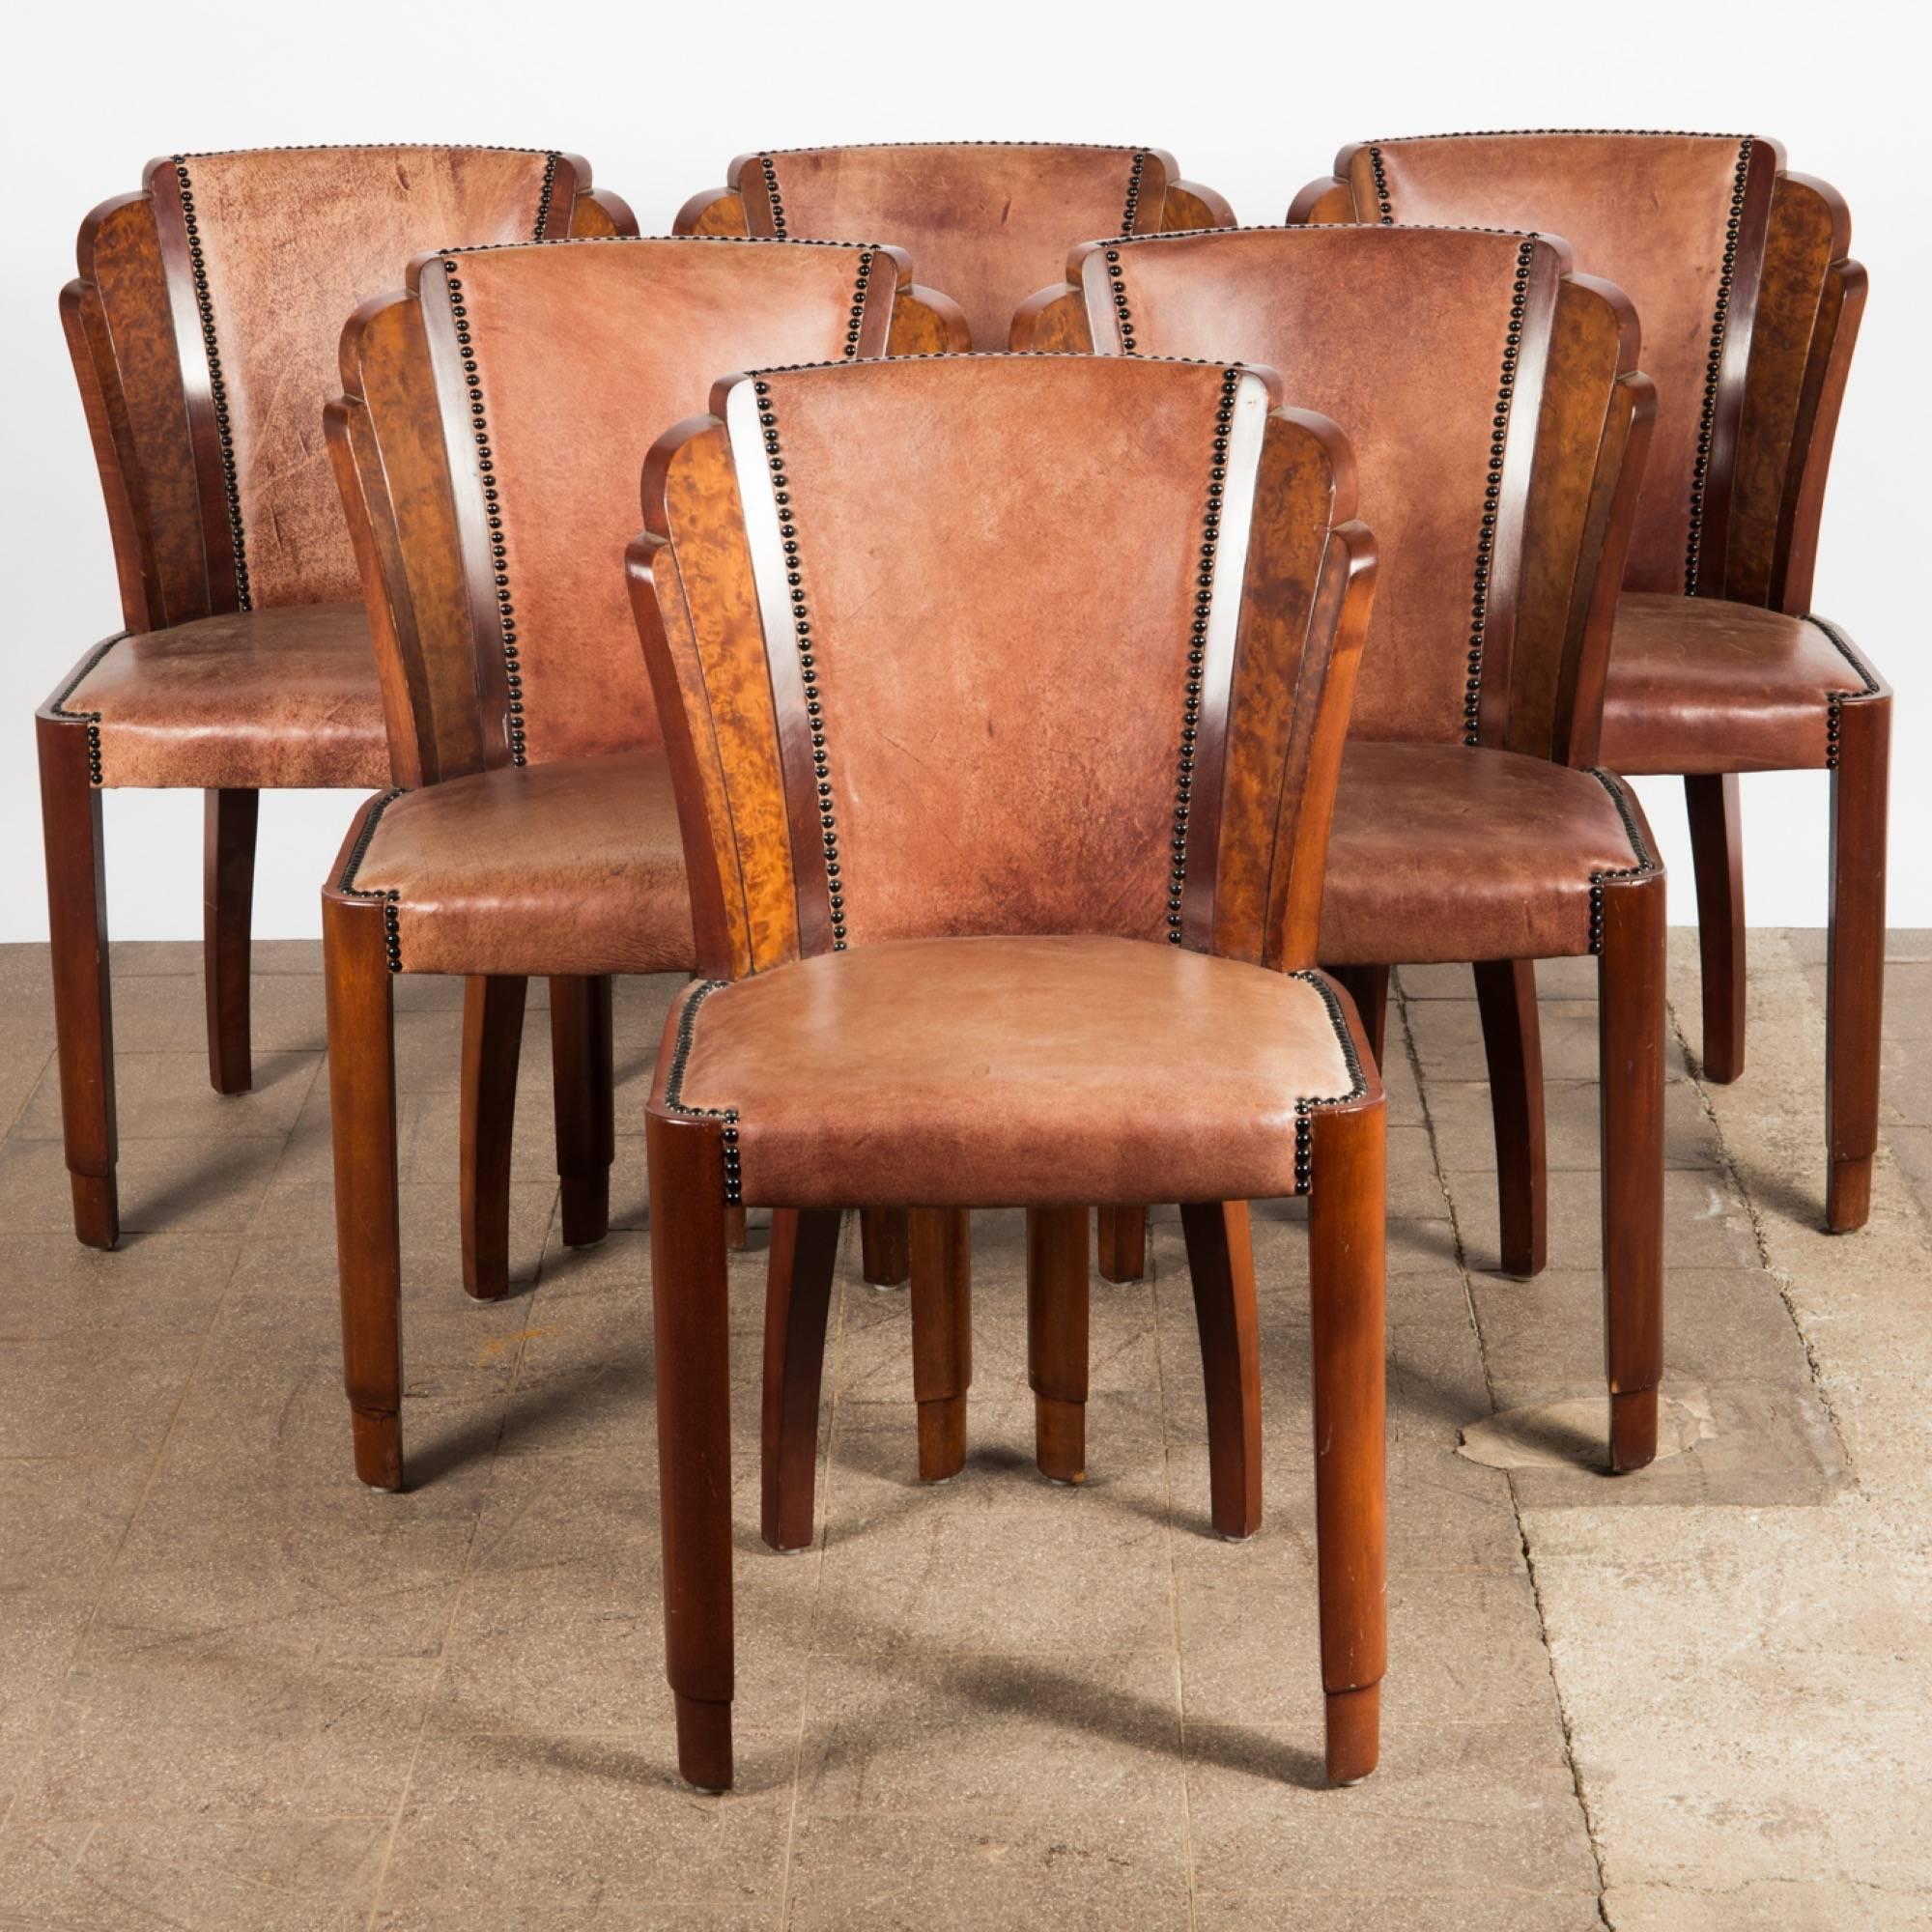 A set of six Art Deco chairs. Structure of Thuja burl wood, back and padded seat with cognac leather cover and brass tacks.